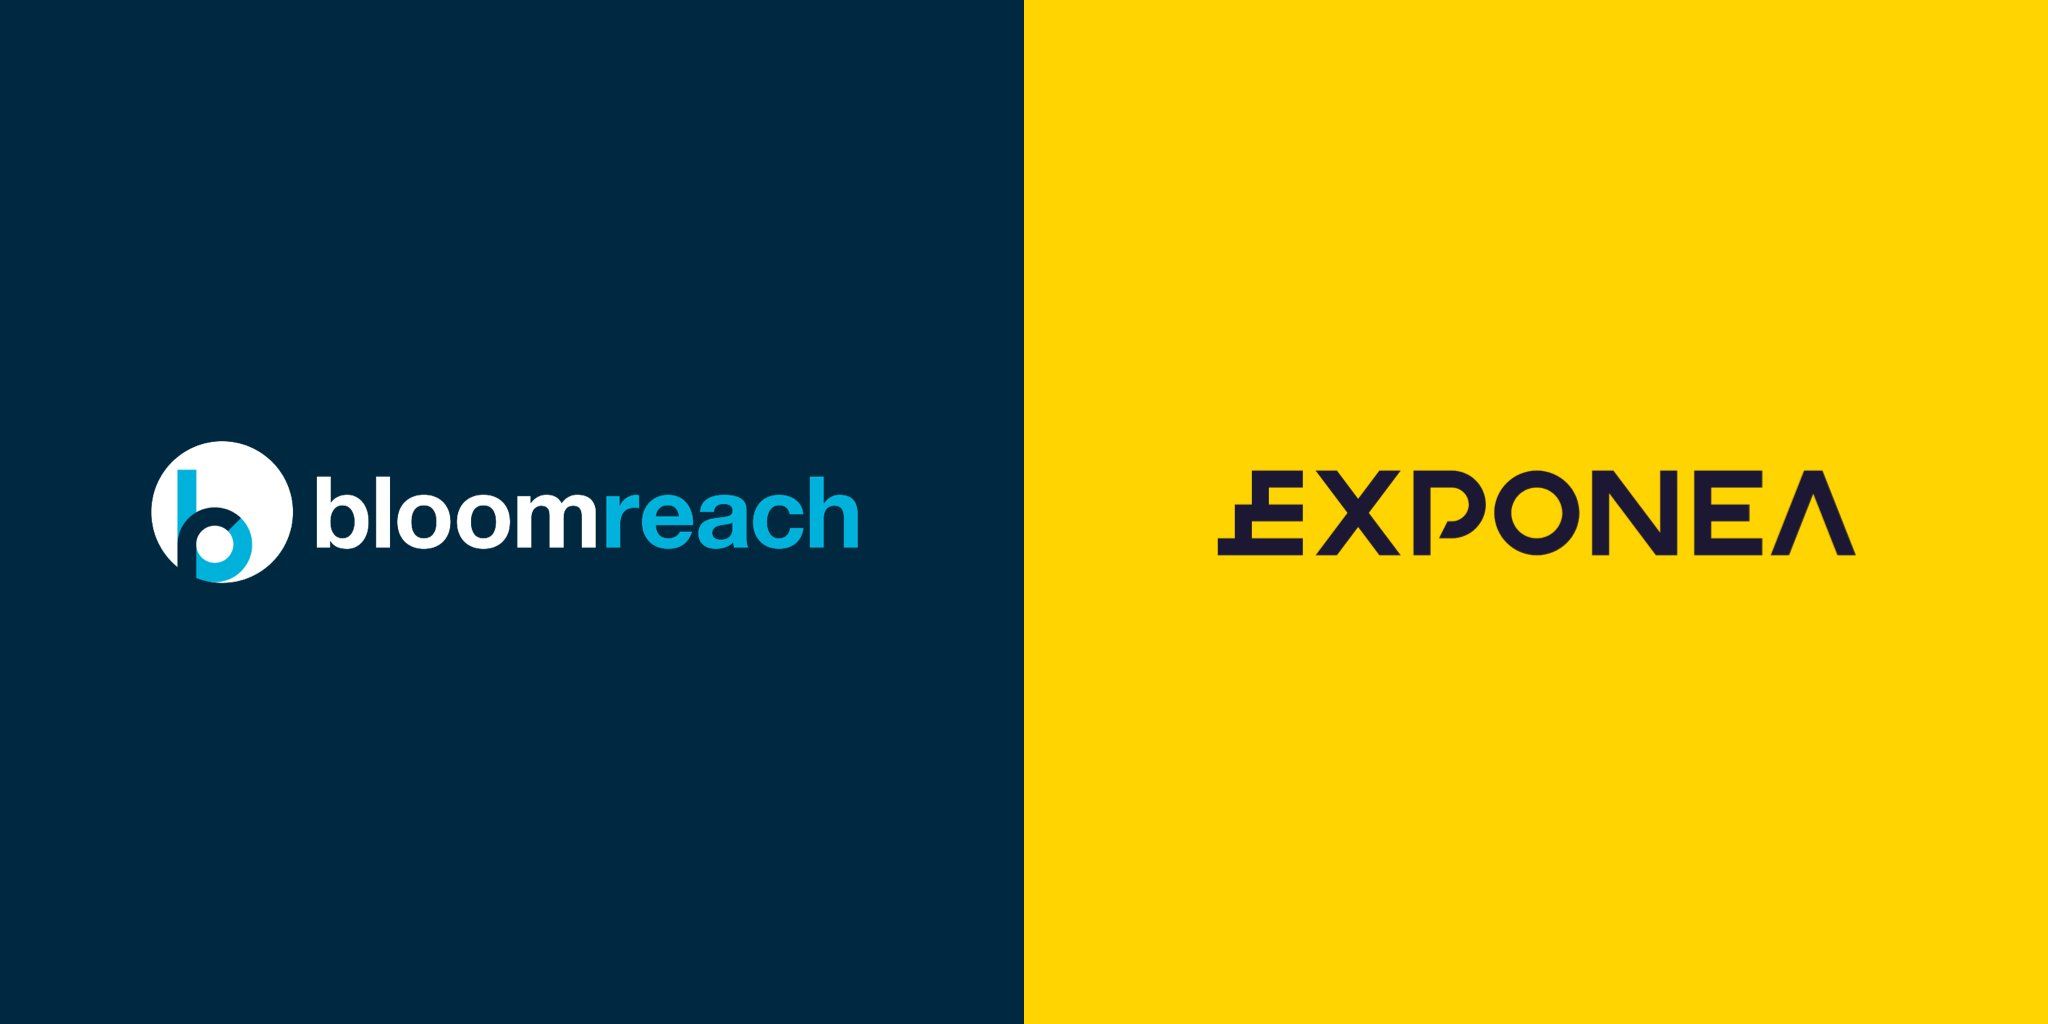 Bloomreach and Exponea Logo Images